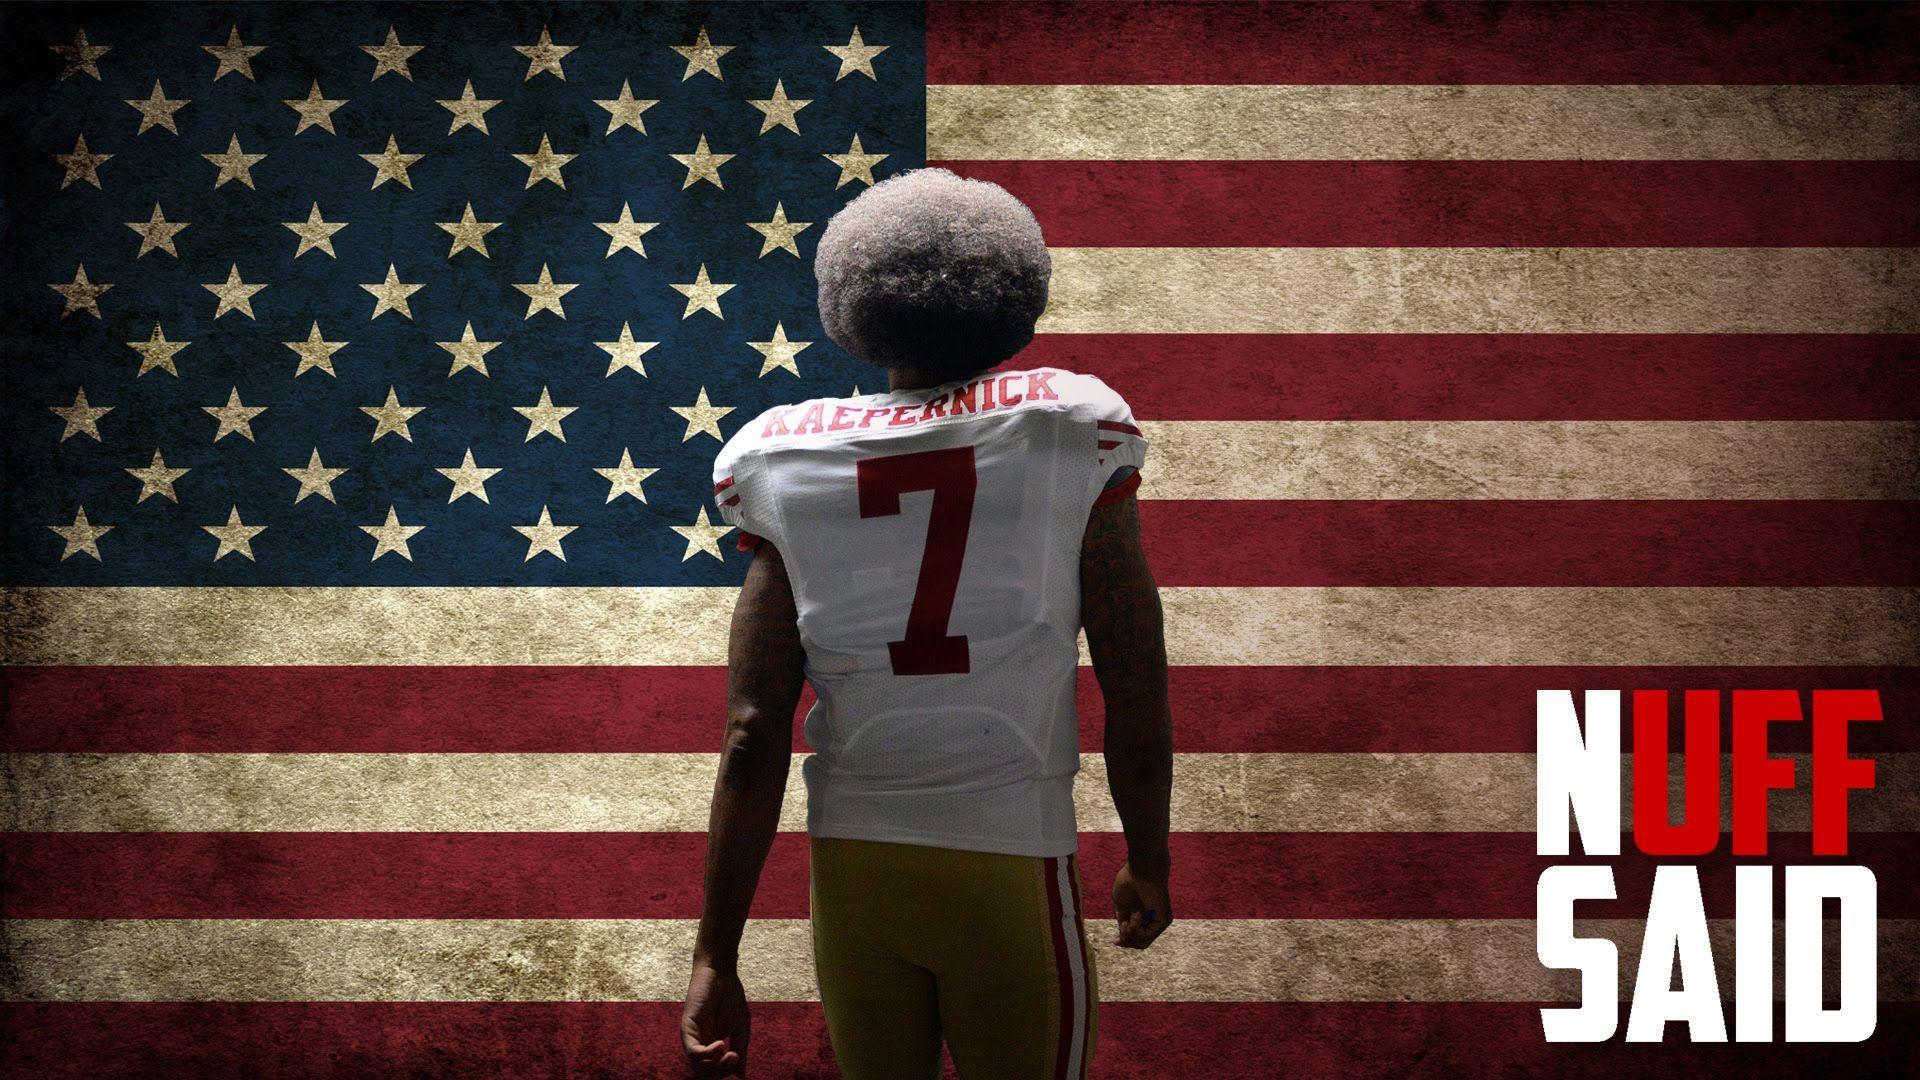 Colin Kaepernick's message is more important than his method